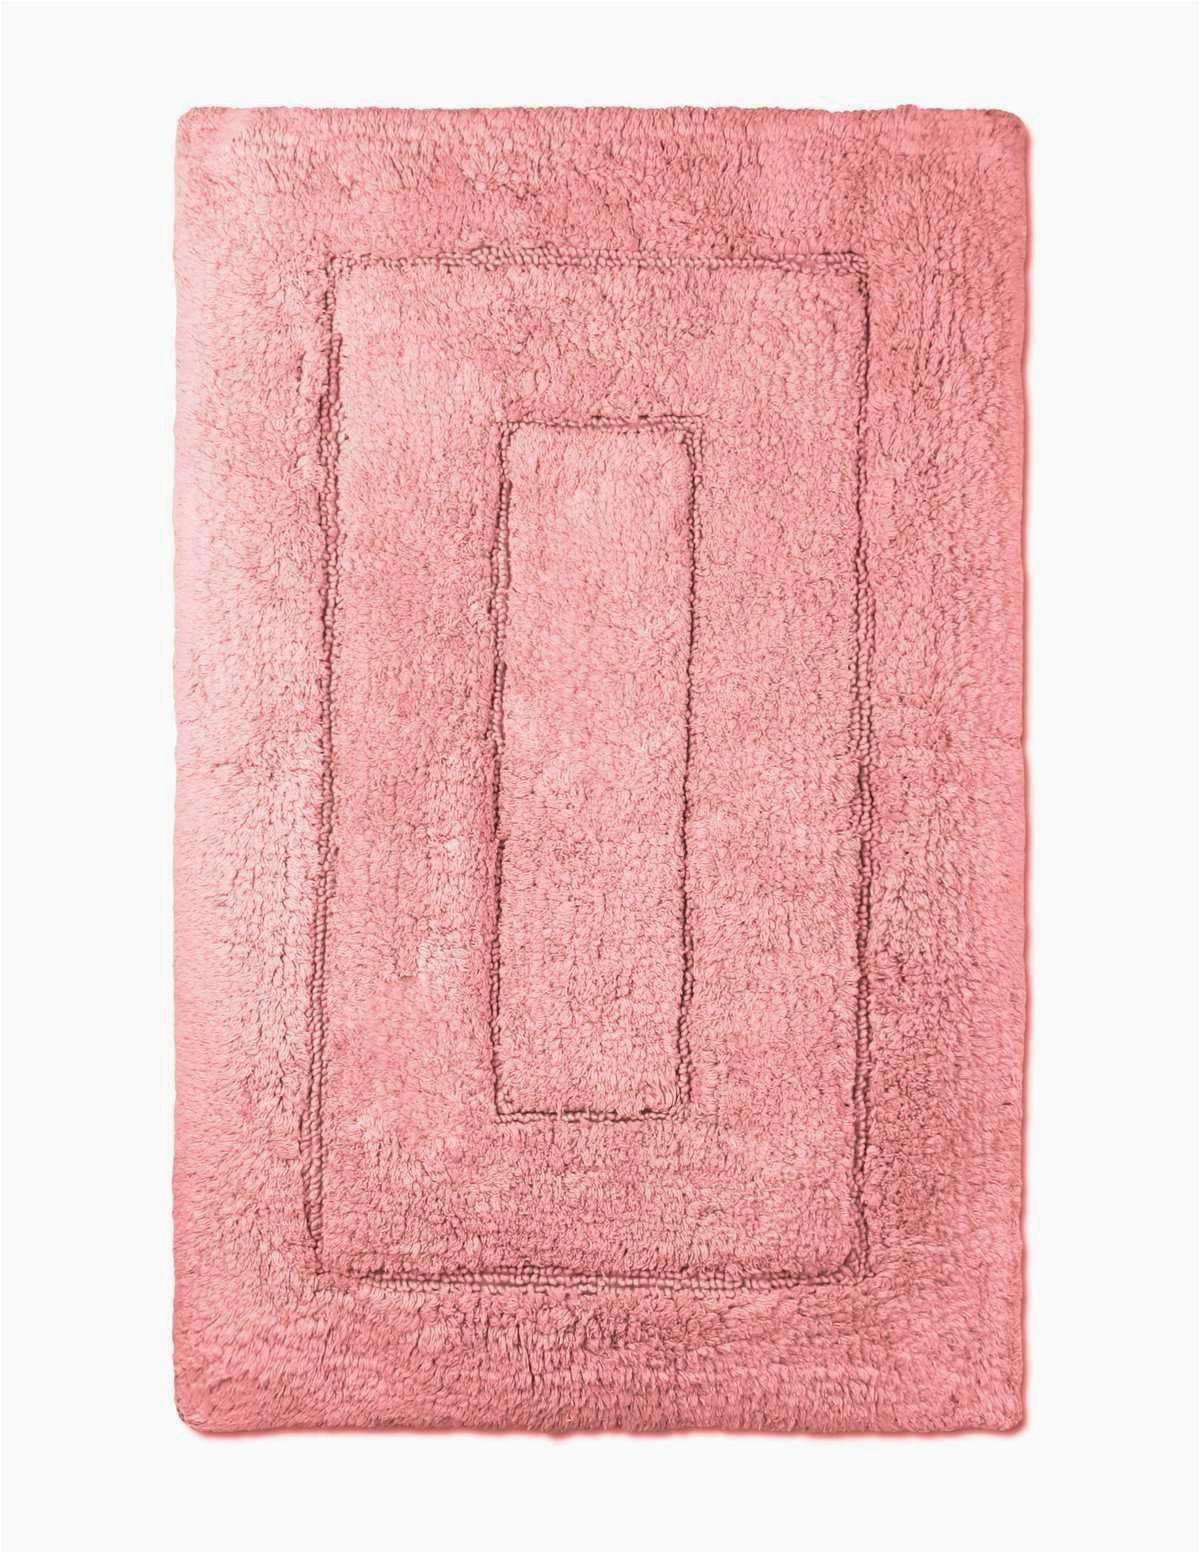 Salmon Colored Bath Rugs Spring Bliss Egyptian Cotton Bath Rugs